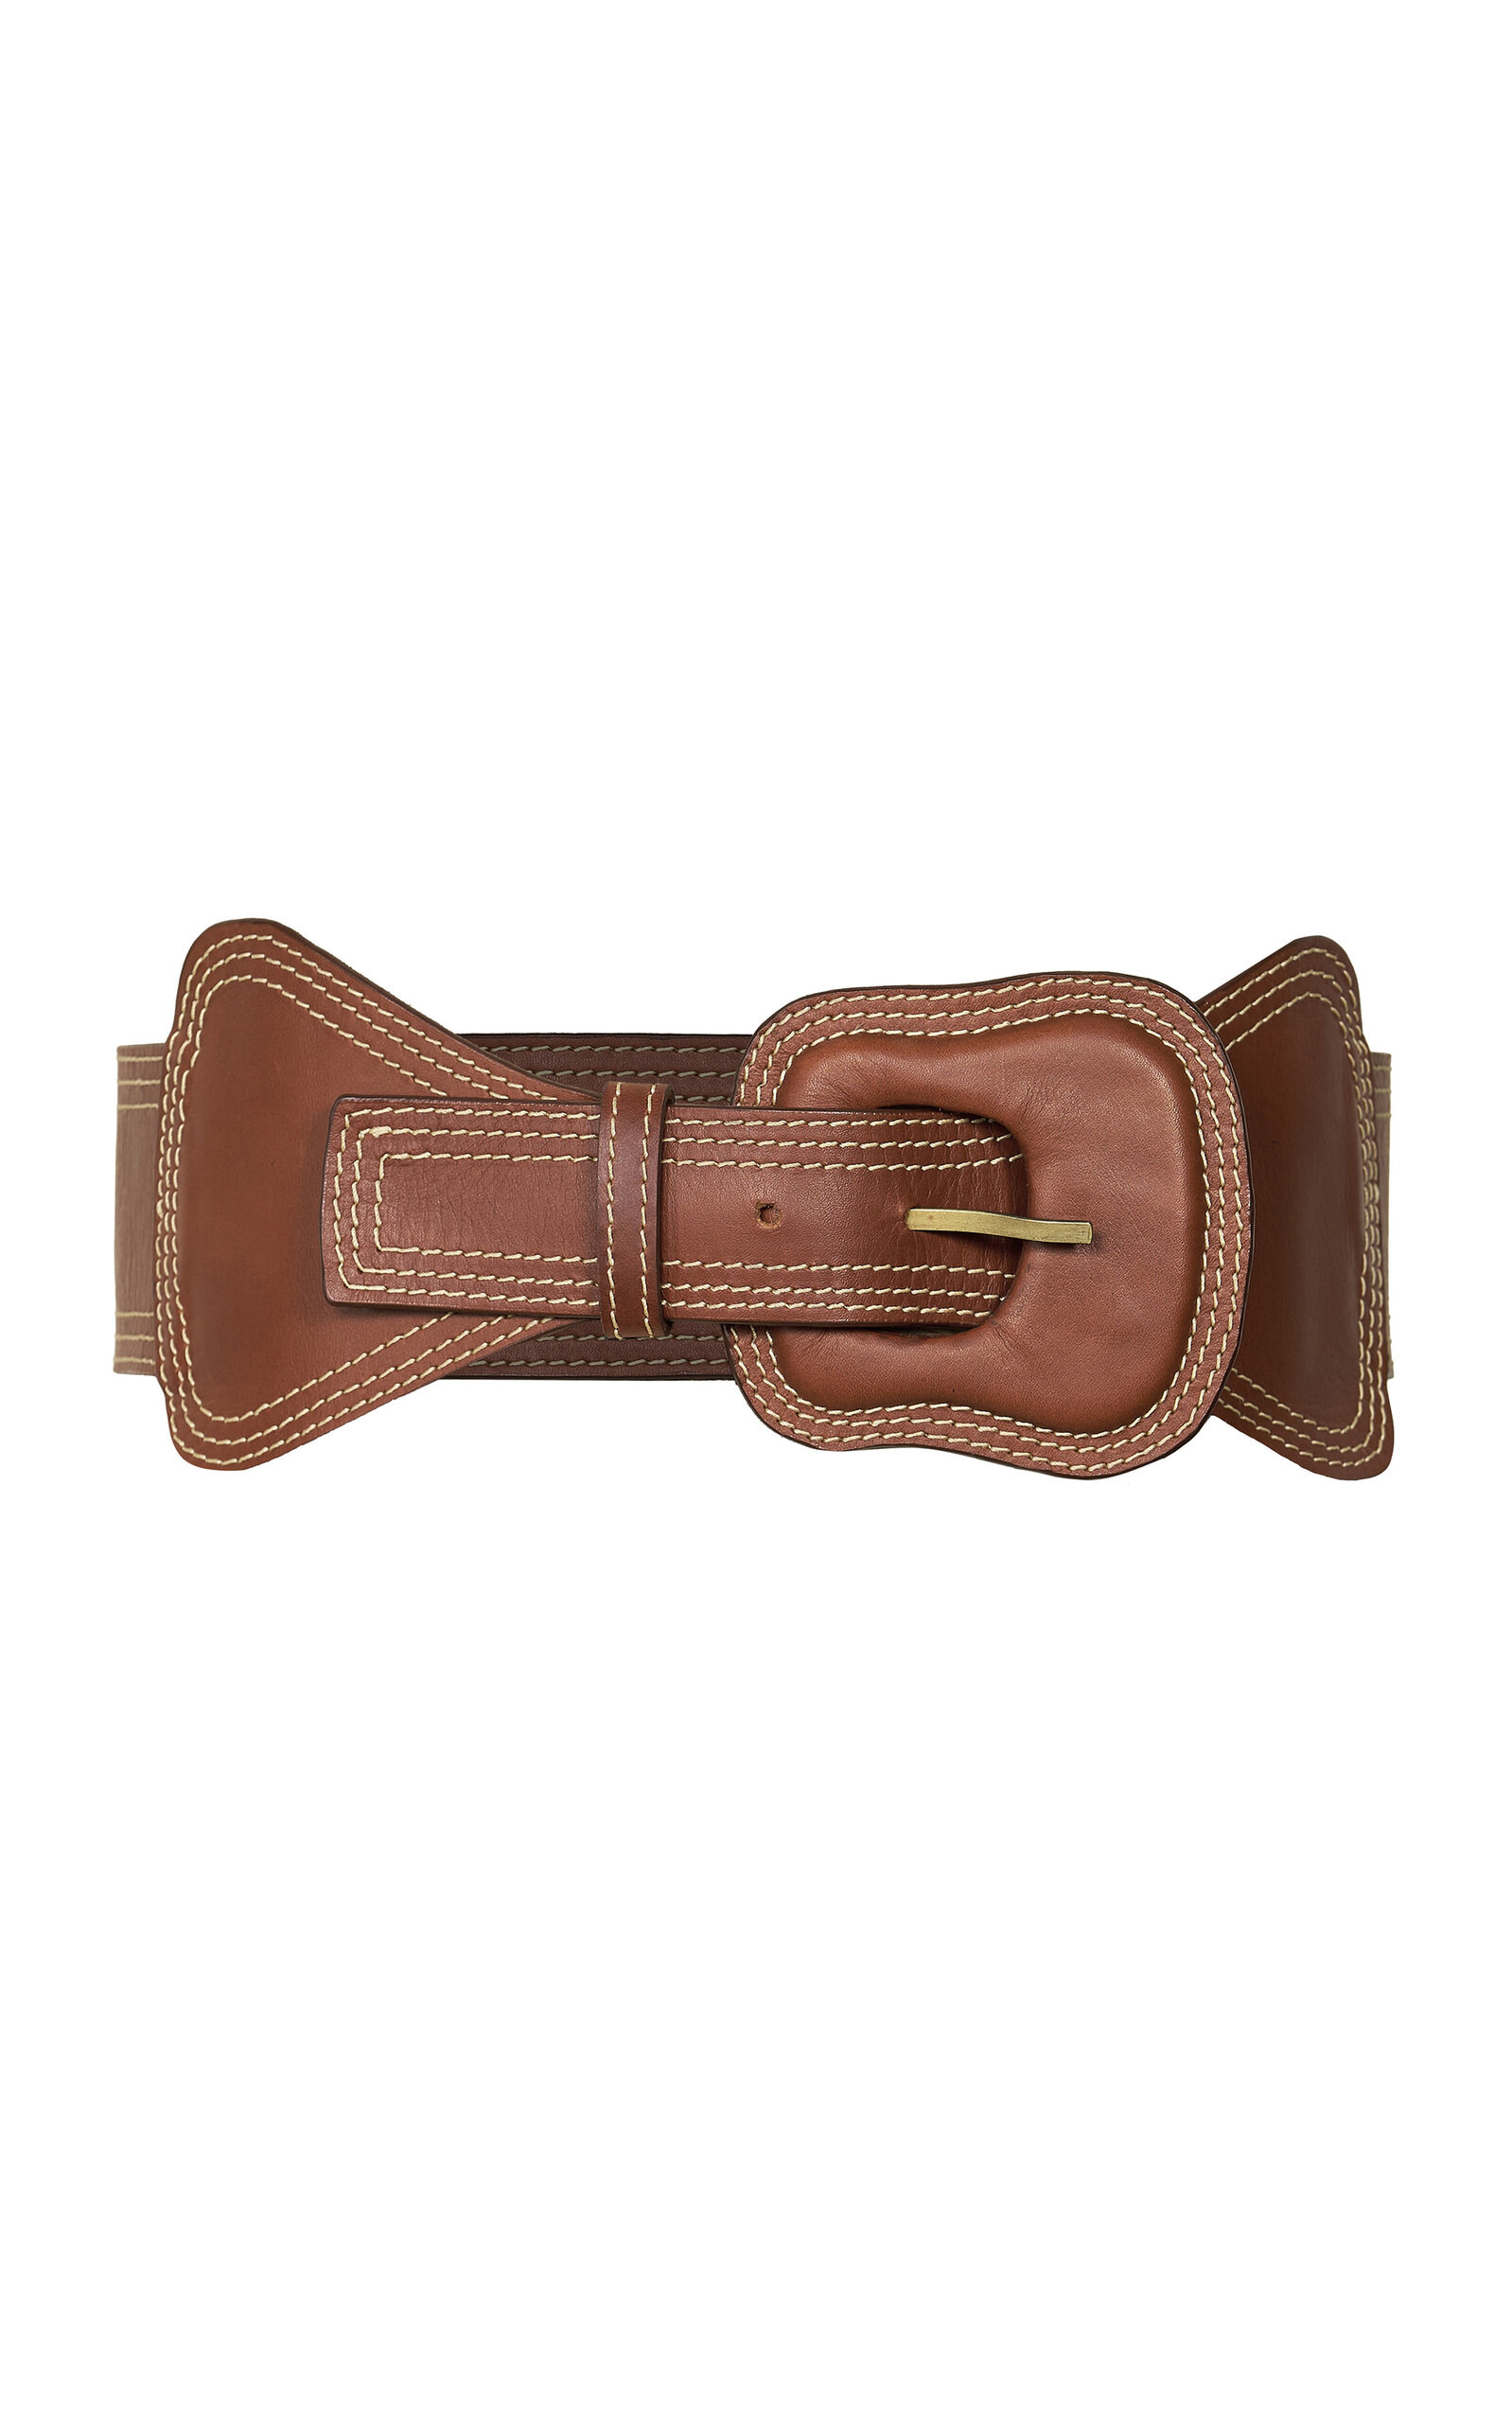 Johanna Ortiz Southern Tirbutary Leather Belt In Brown